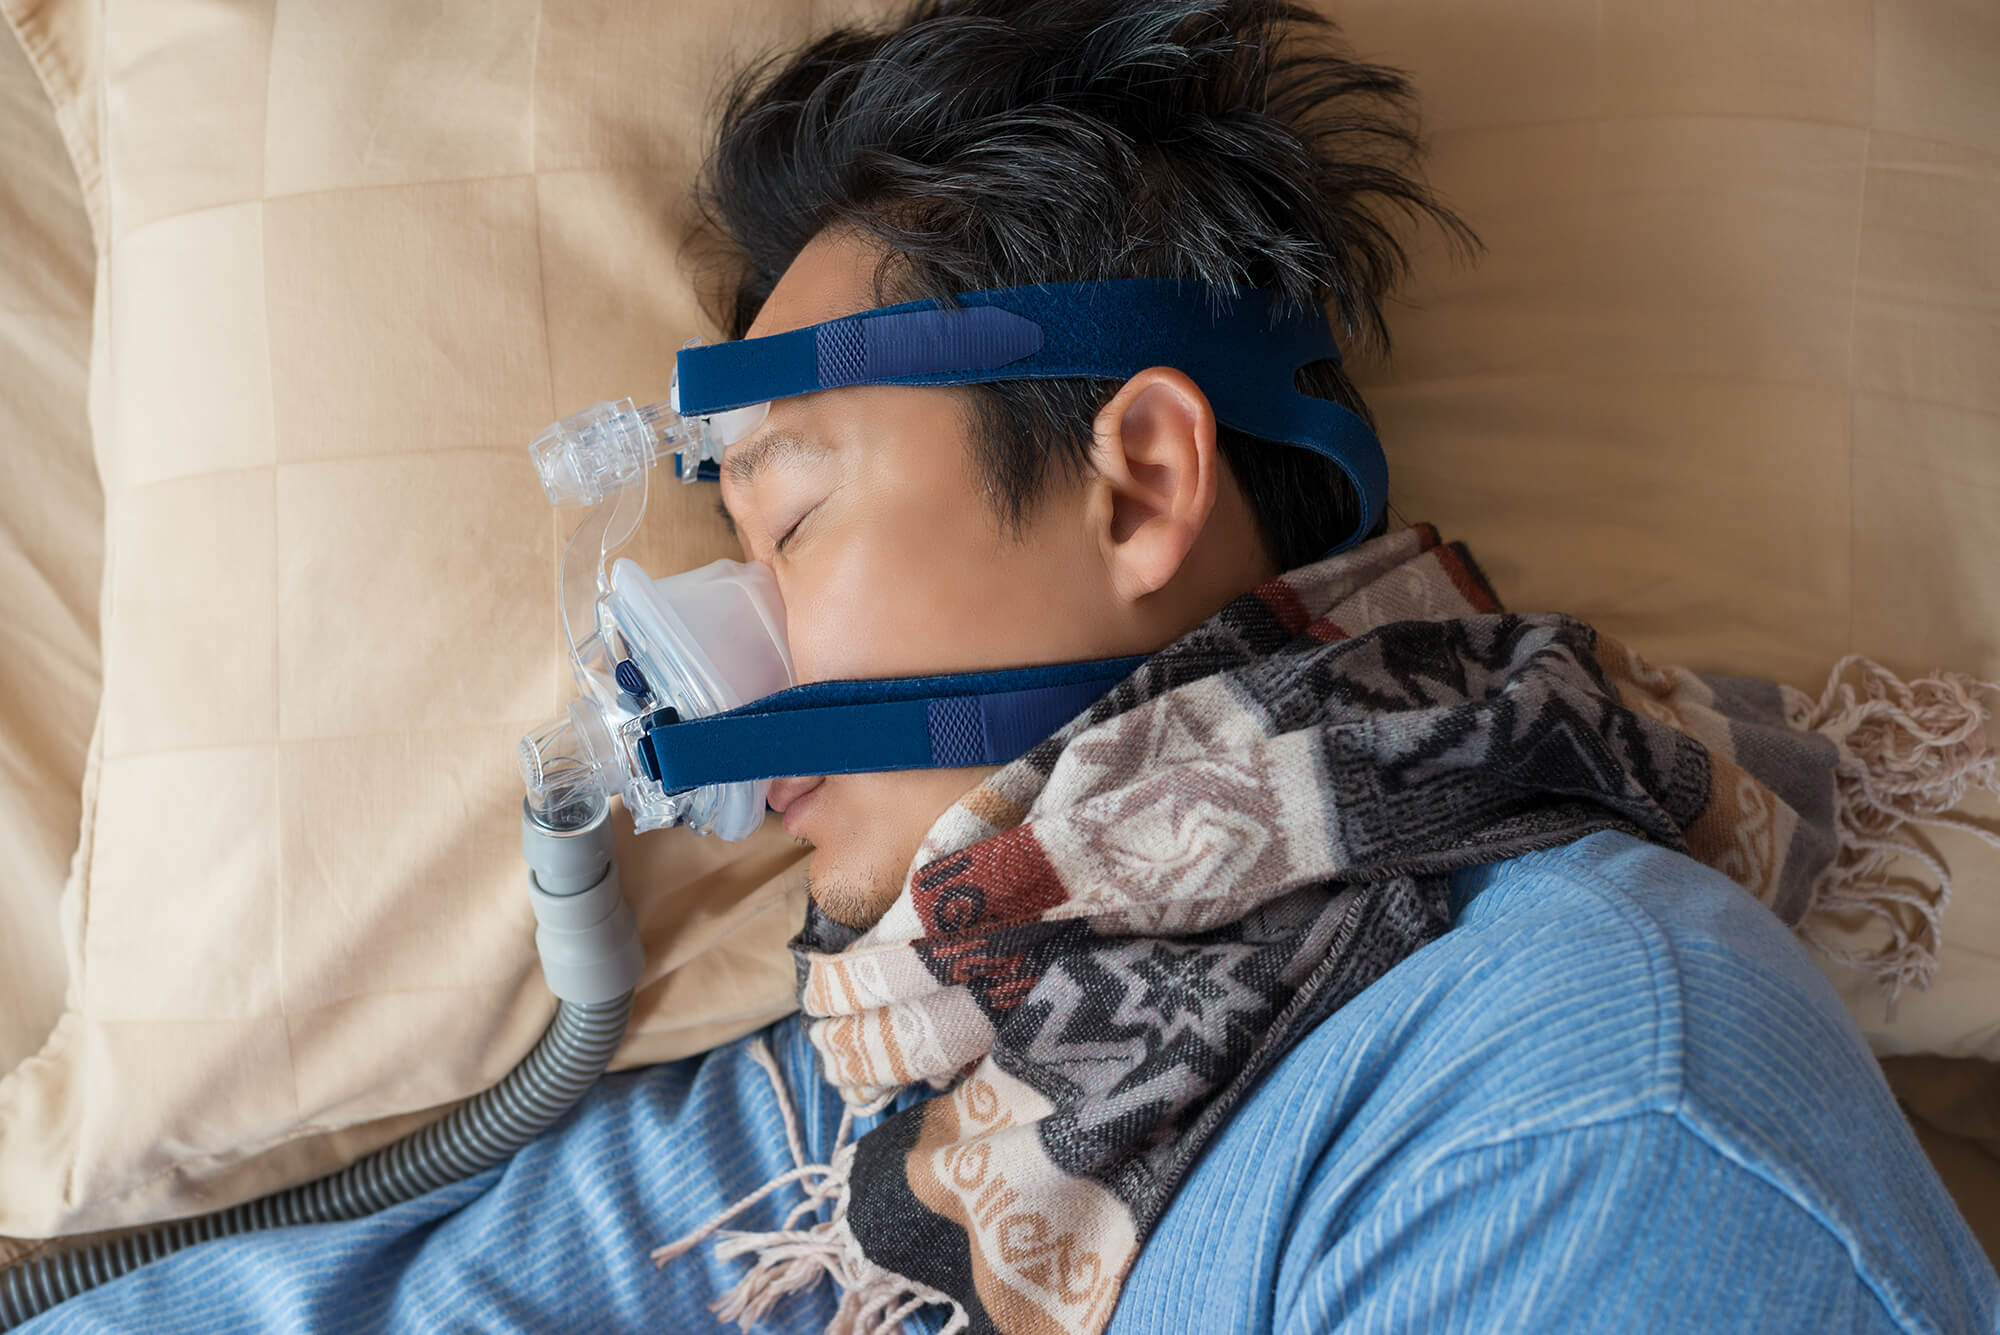 Solutions for Those Still Snoring While Using CPAP Masks